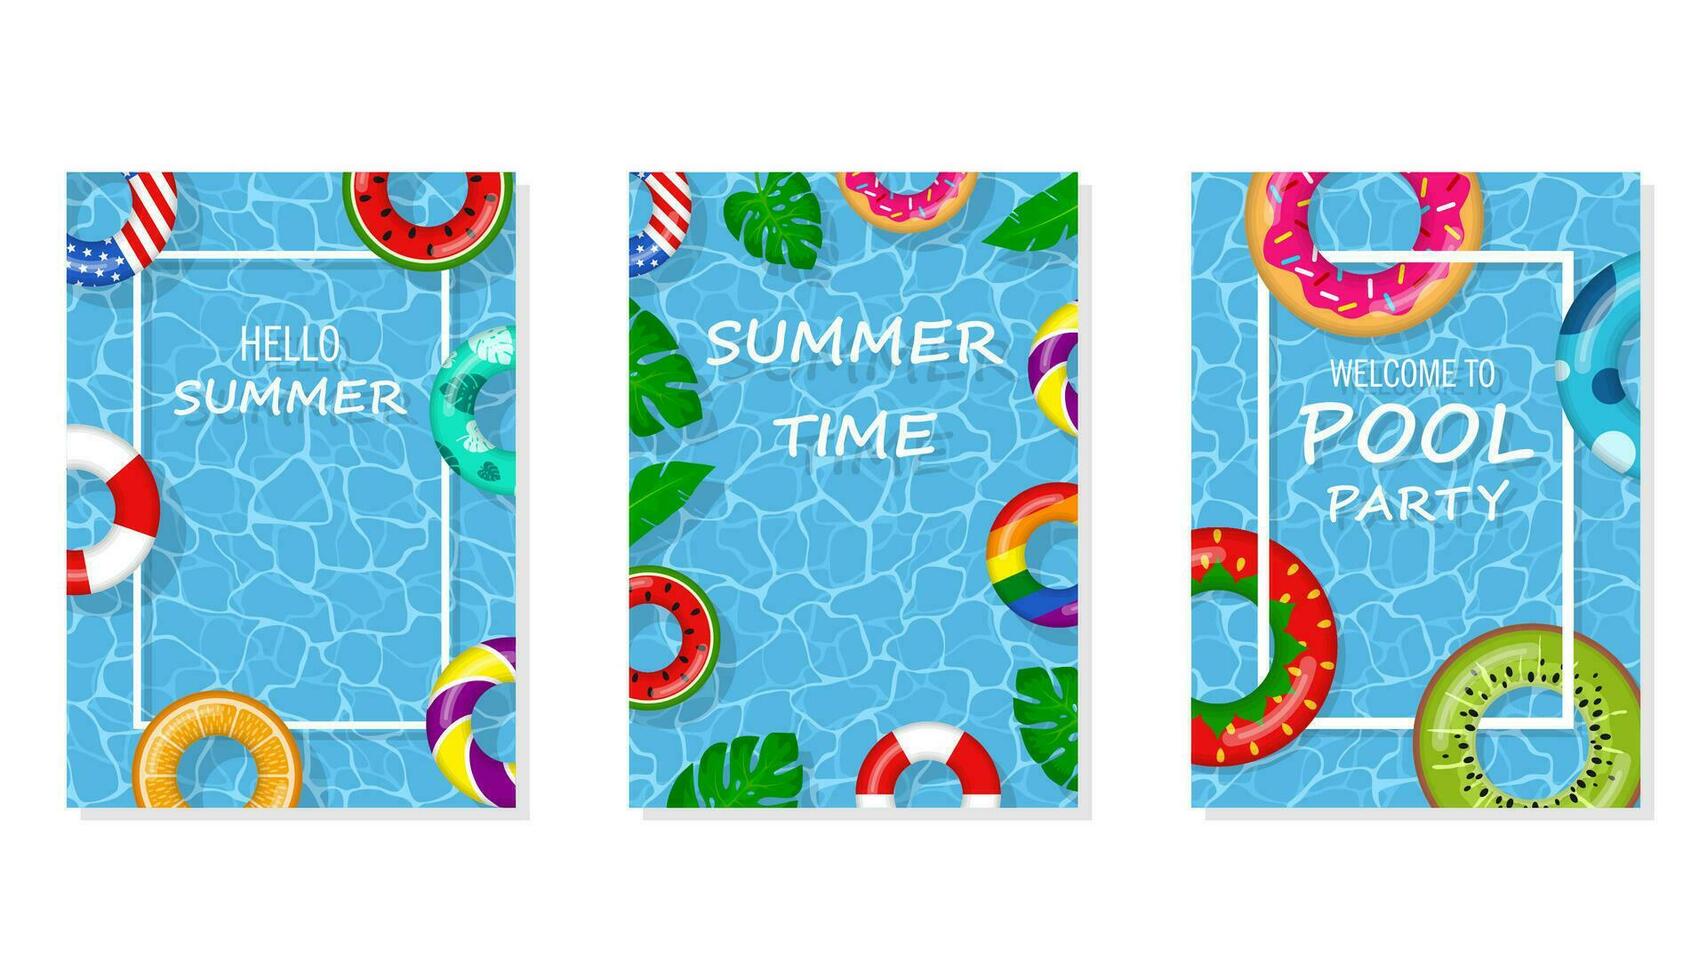 Vector bright and fun advertising poster template for pool party. Welcome to pool party flyer with swimming pool, floating rings and tropical leaves. Pool summer party, poster or banner illustration.